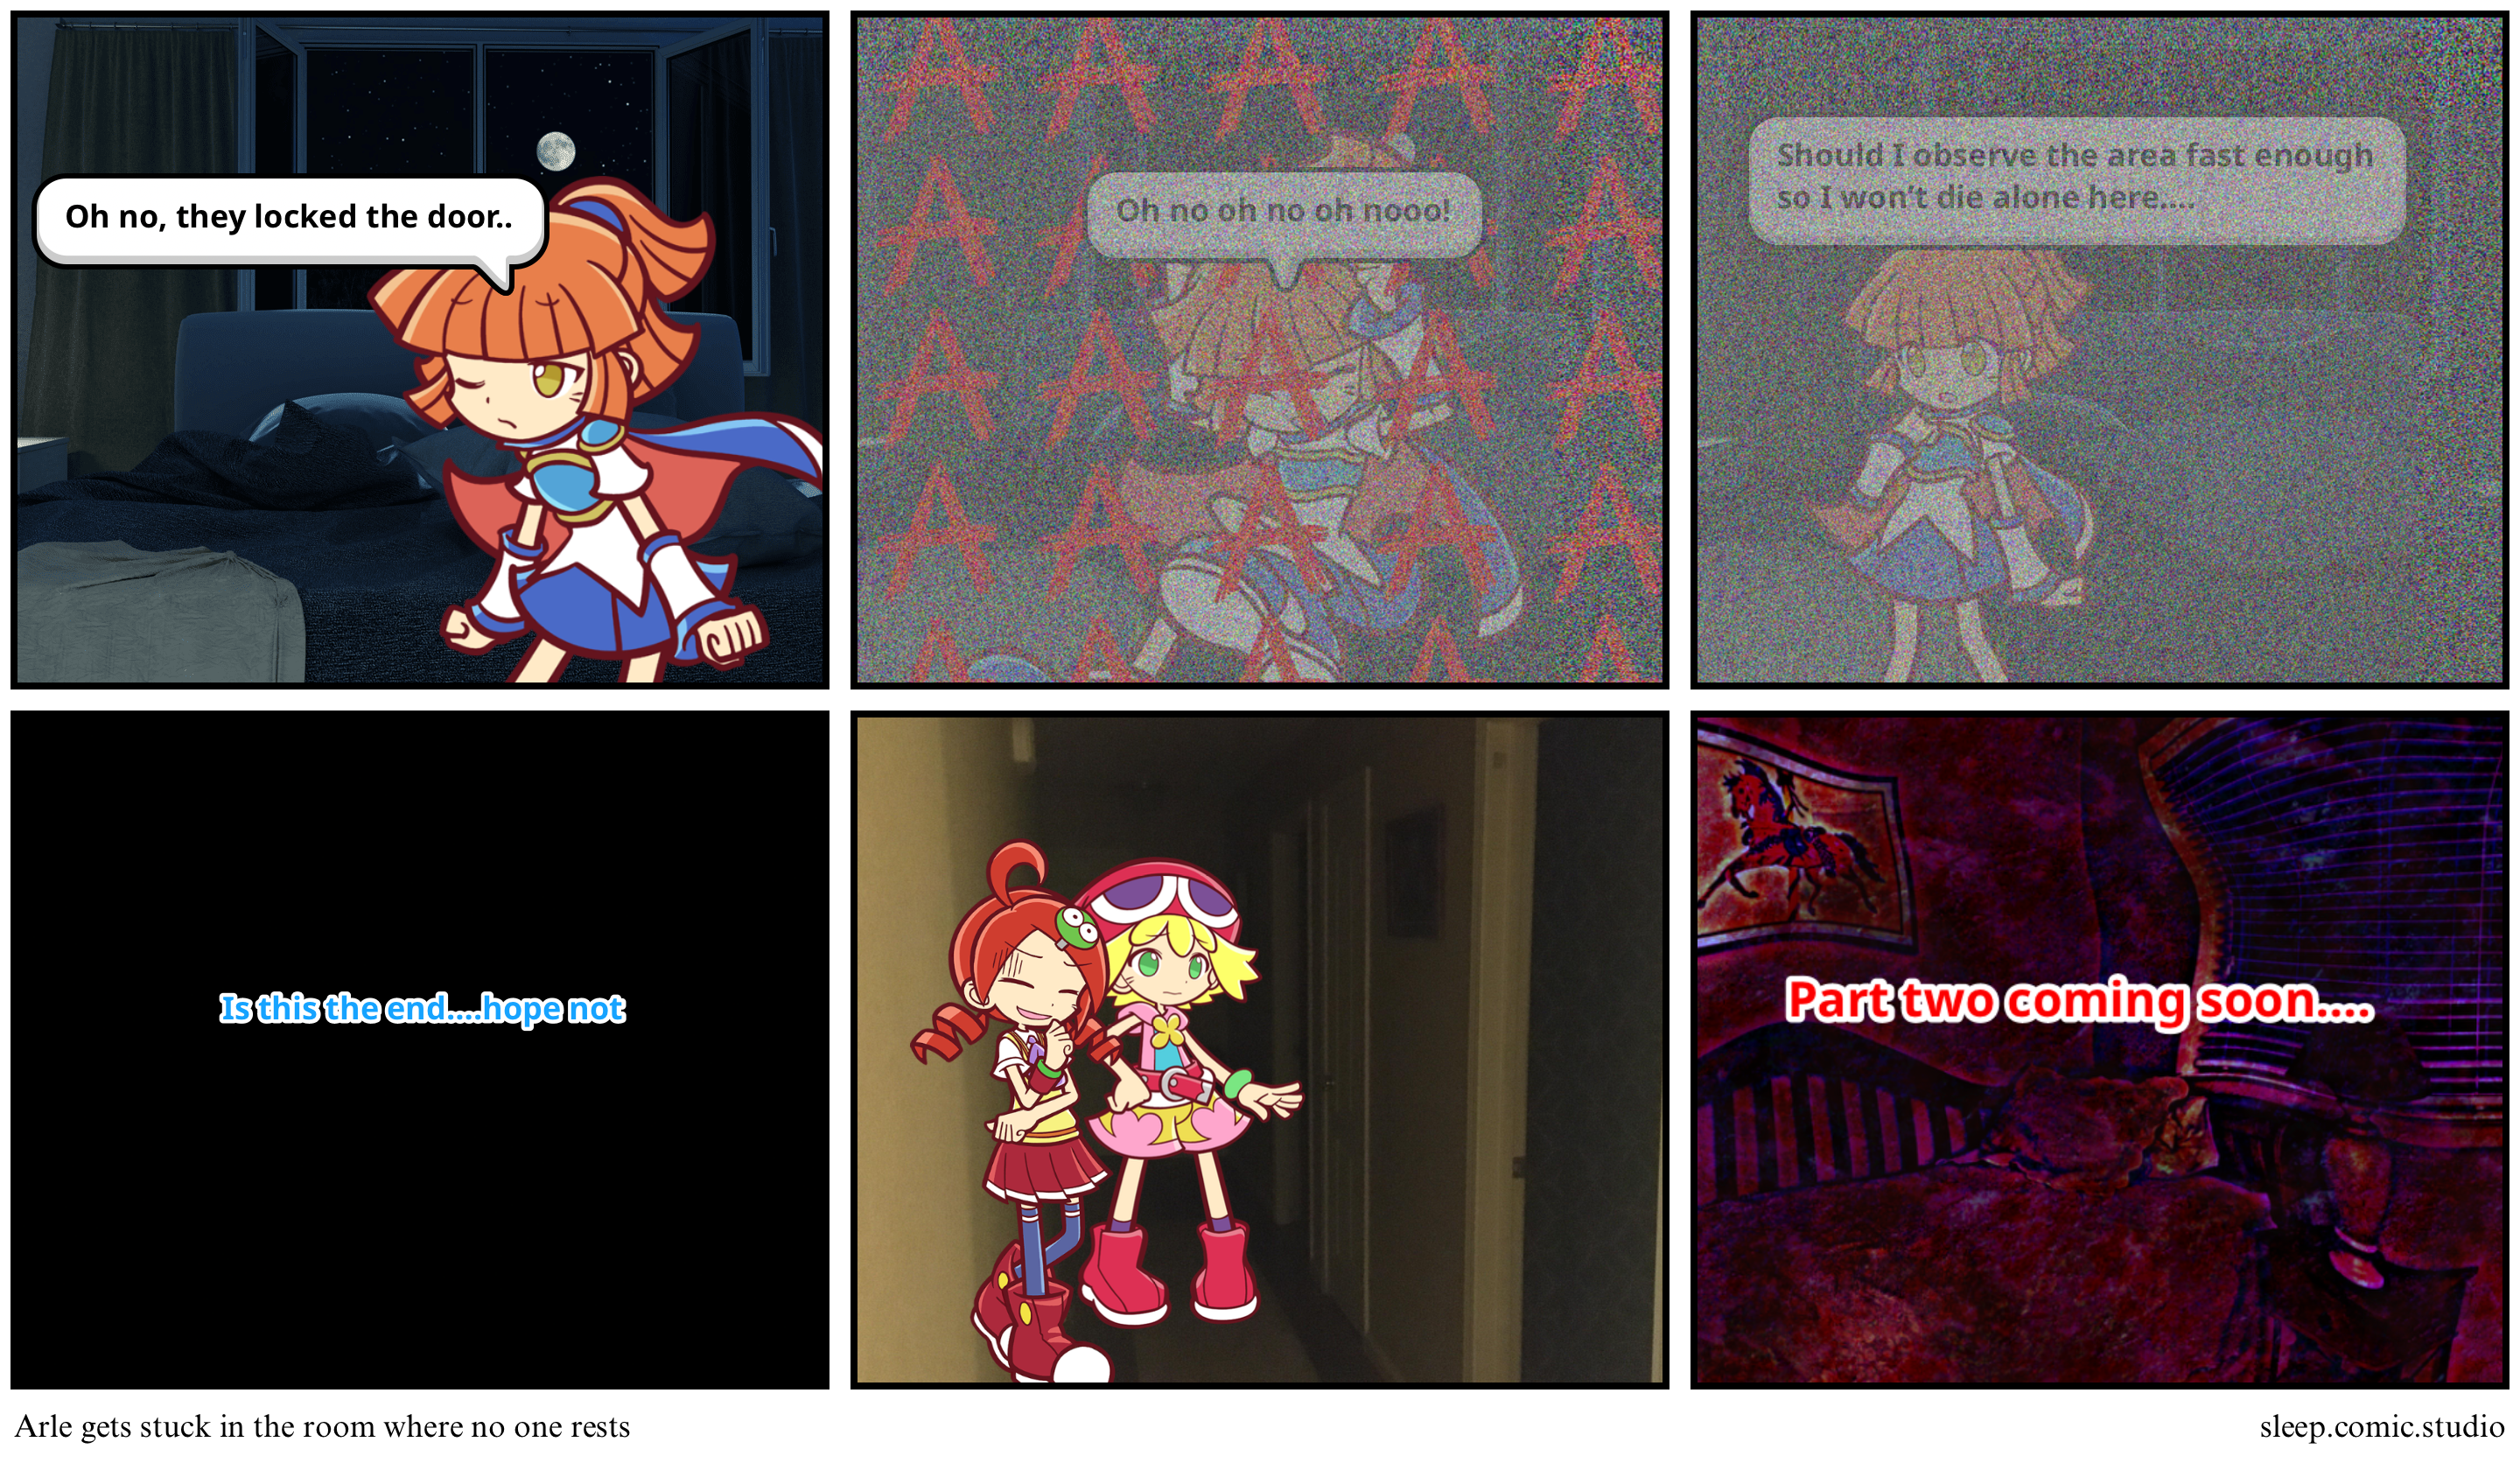 Arle gets stuck in the room where no one rests